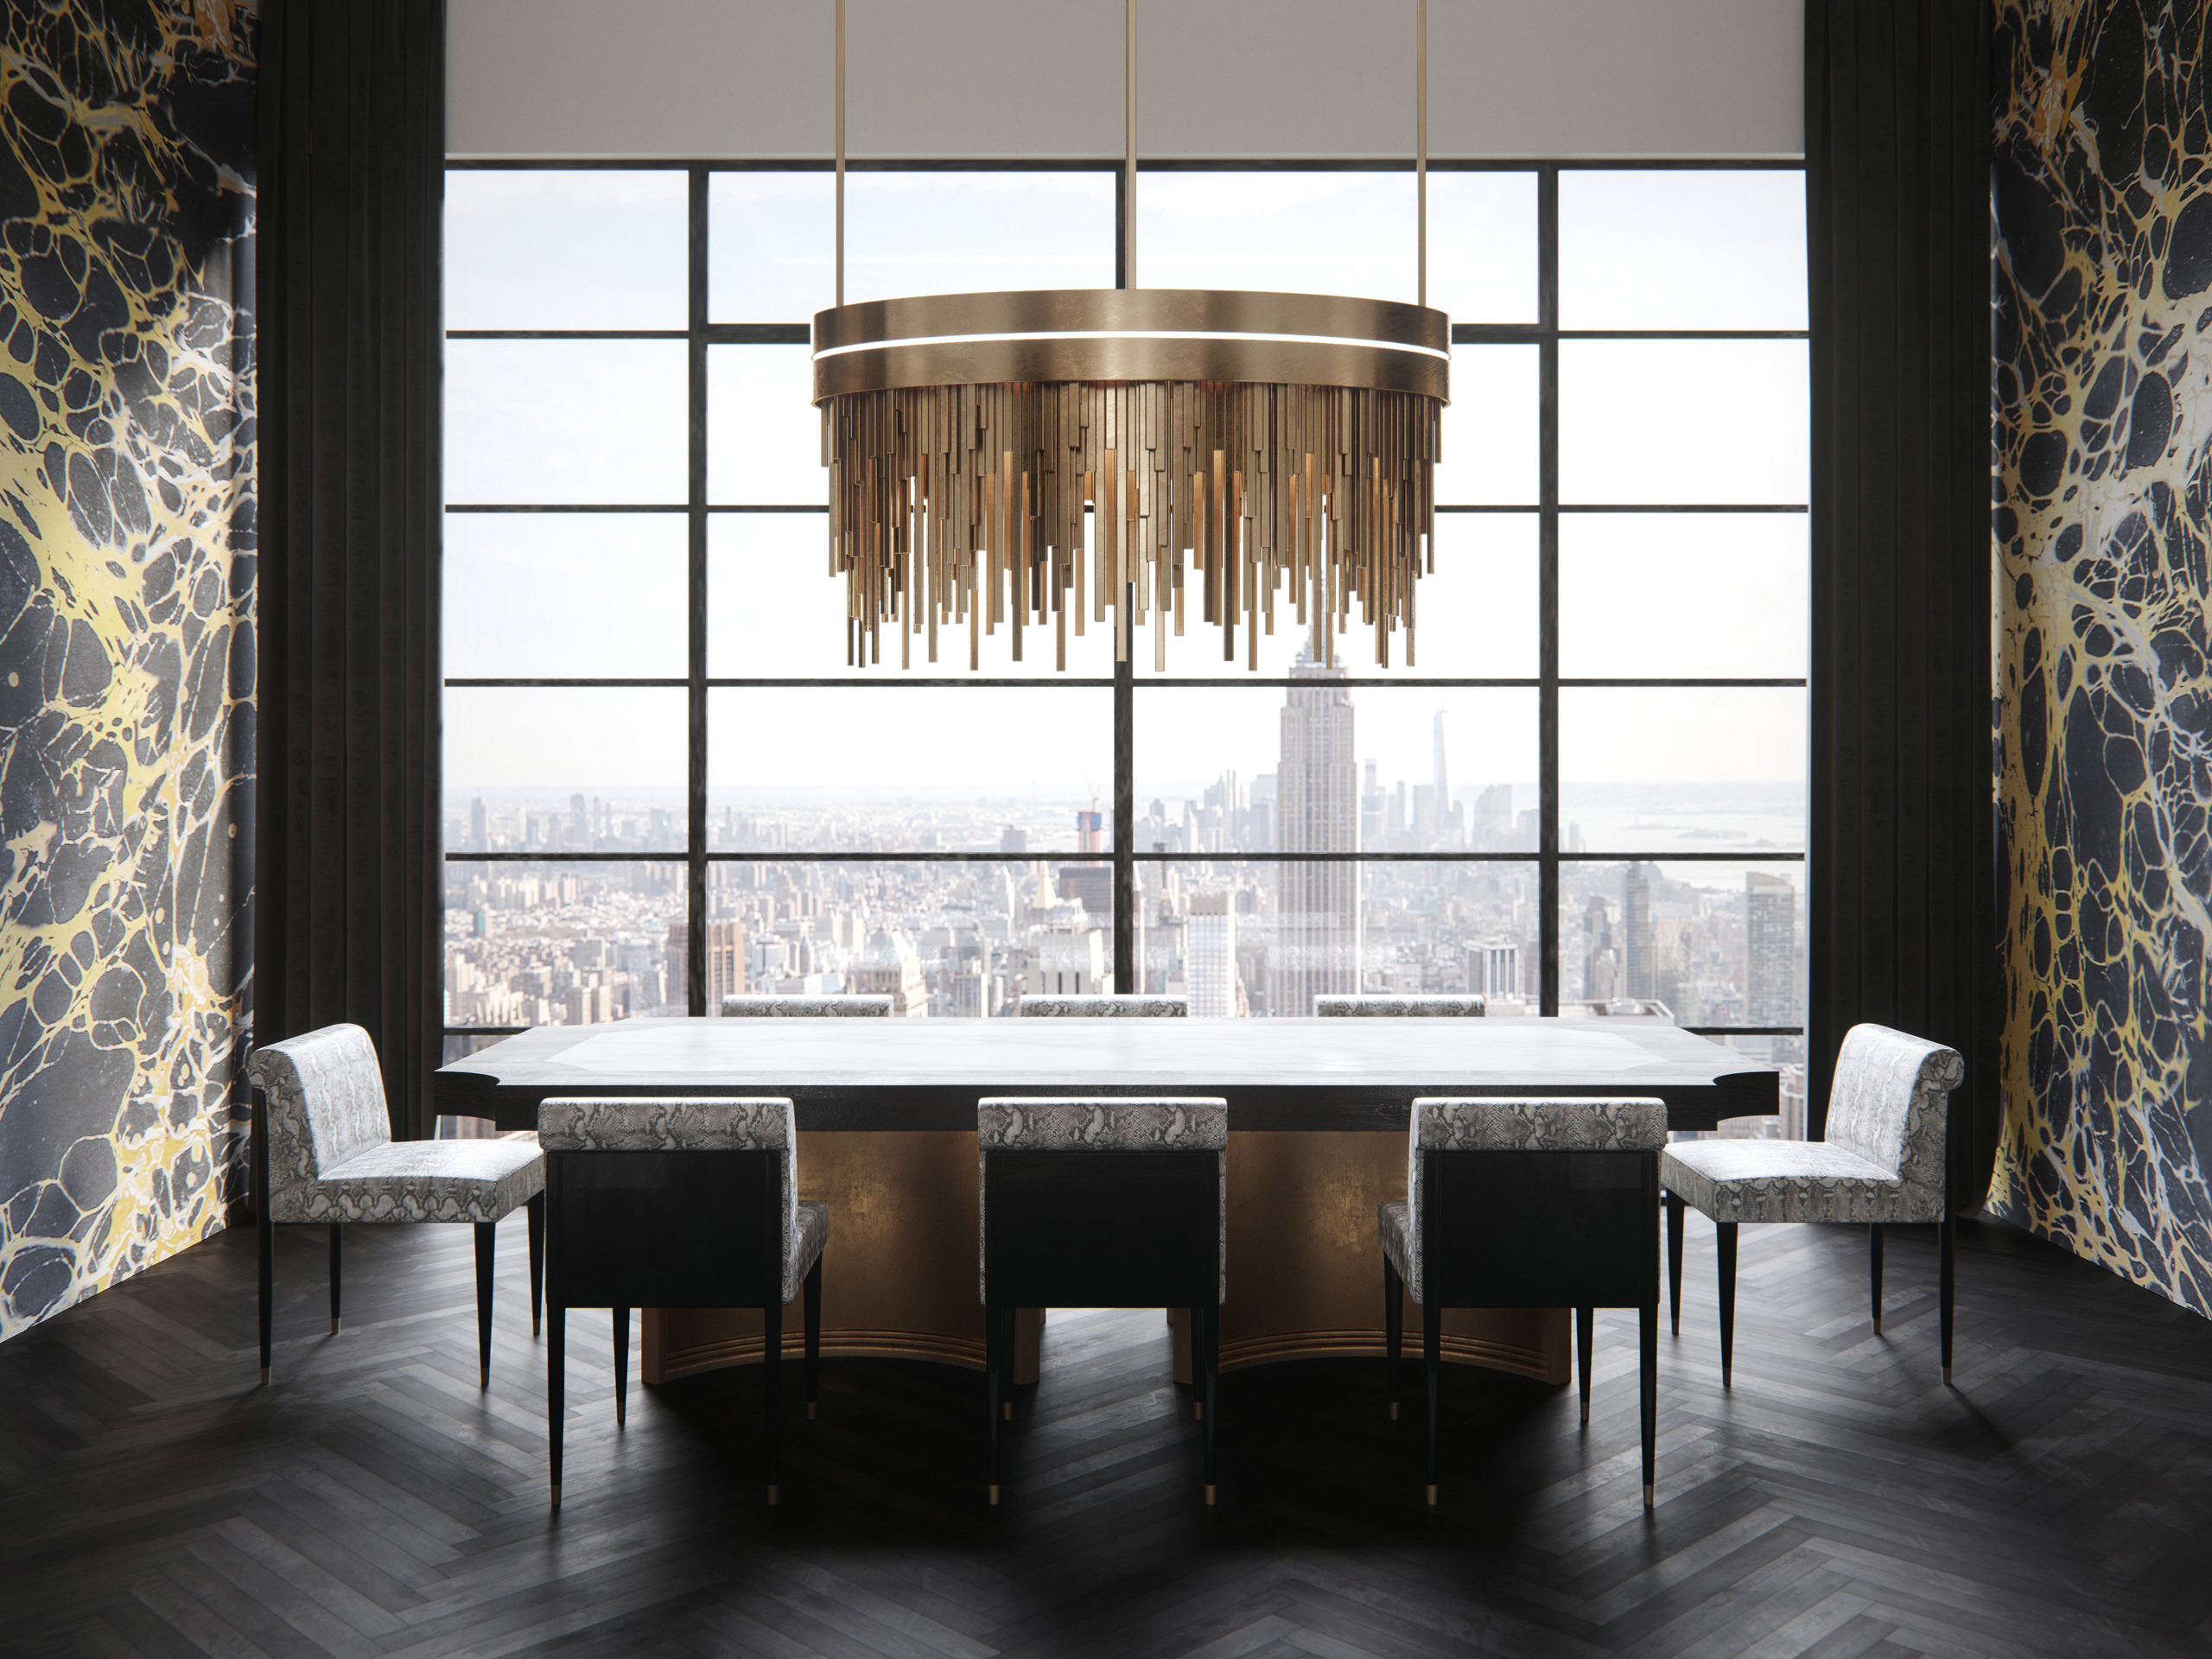 3D interior visualization of a dining room in a loft-styled show-room condo with a massive wooden table in the centre, snake leather upholstered dining chairs surrounding it